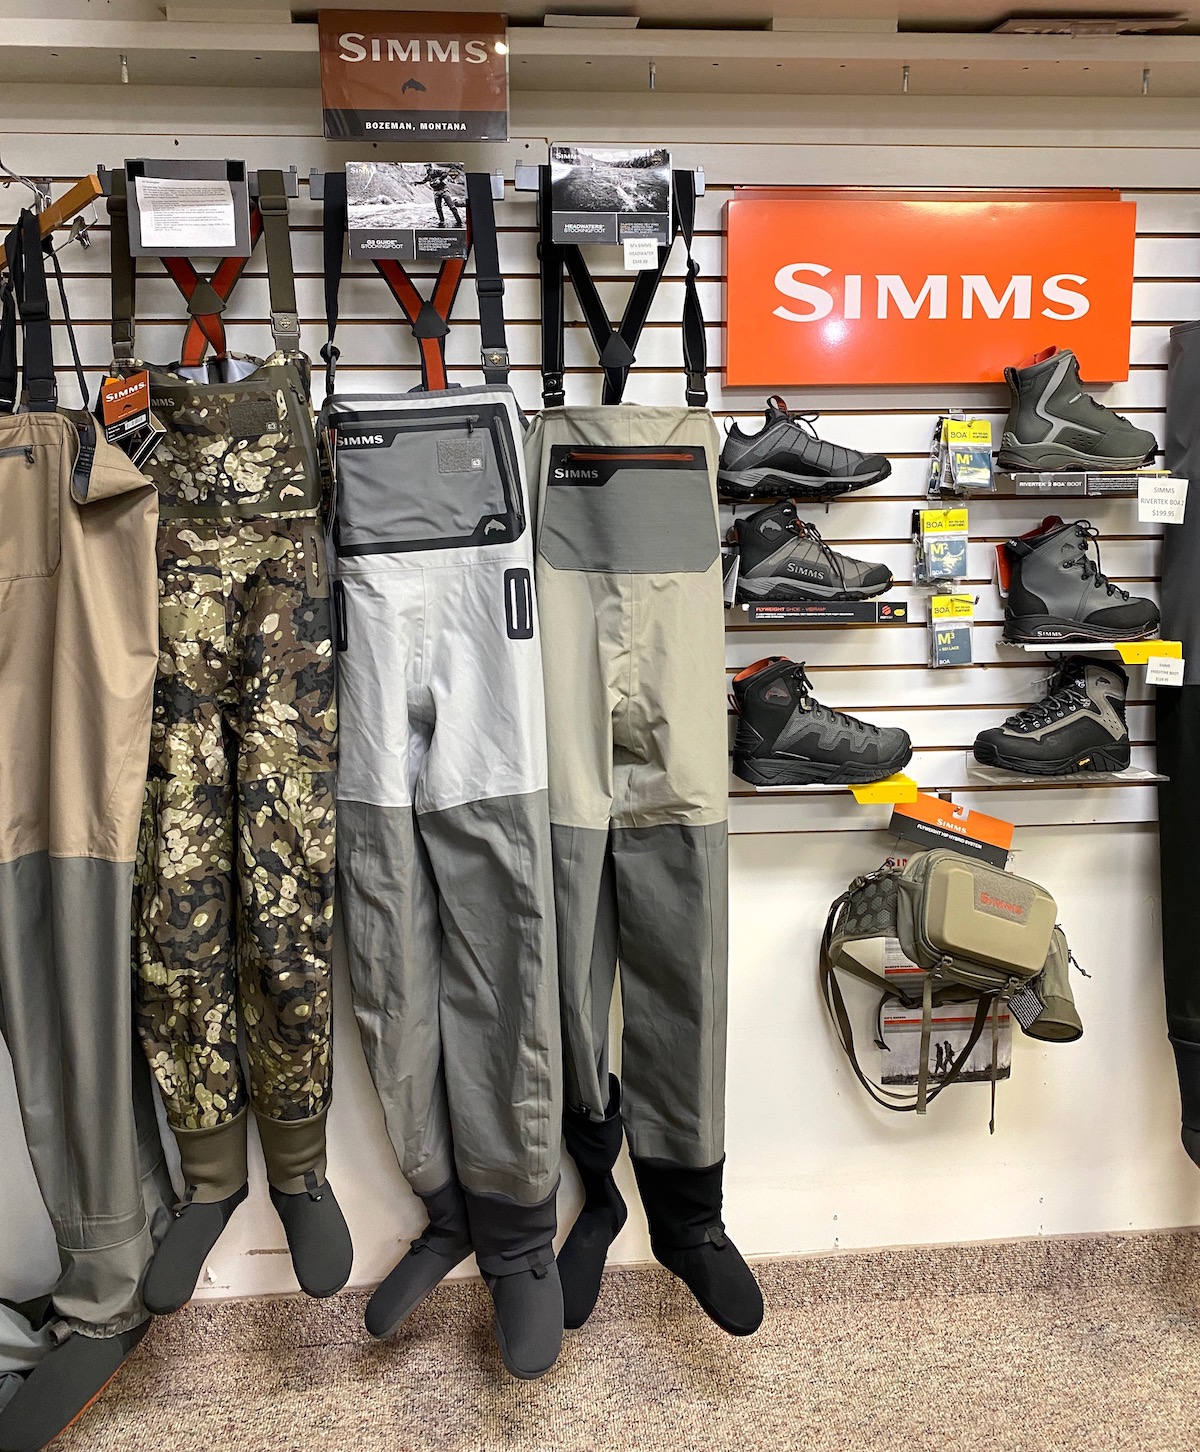 https://rodandreelflyfishing.com/wp-content/uploads/2021/11/Fly-fishing-store-display-of-fishing-waders-and-wading-boots.jpeg